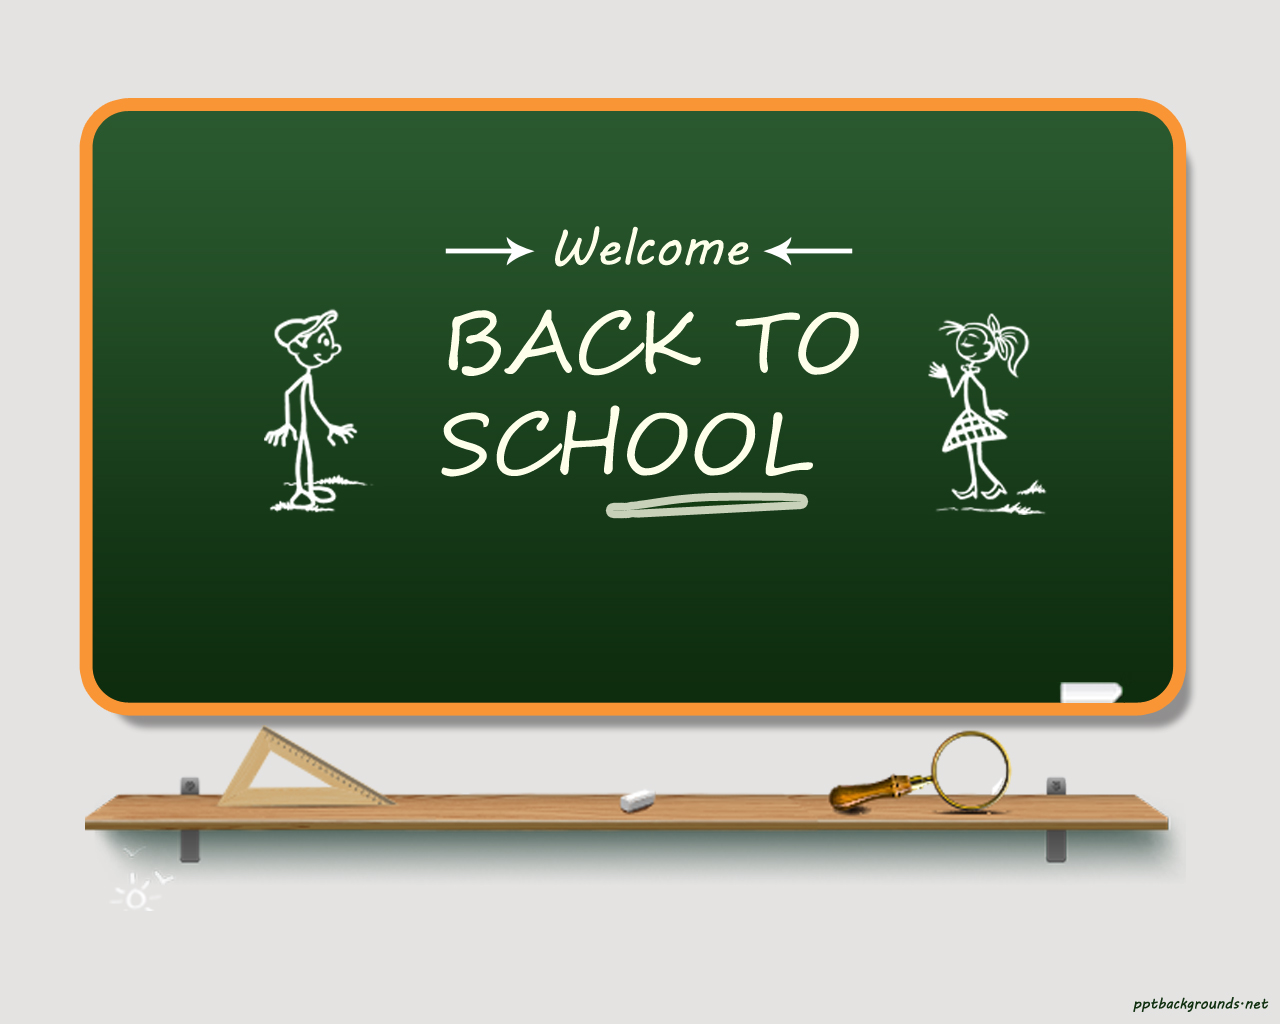 Back To School 20 - 20 Background For PowerPoint - Education Inside Back To School Powerpoint Template